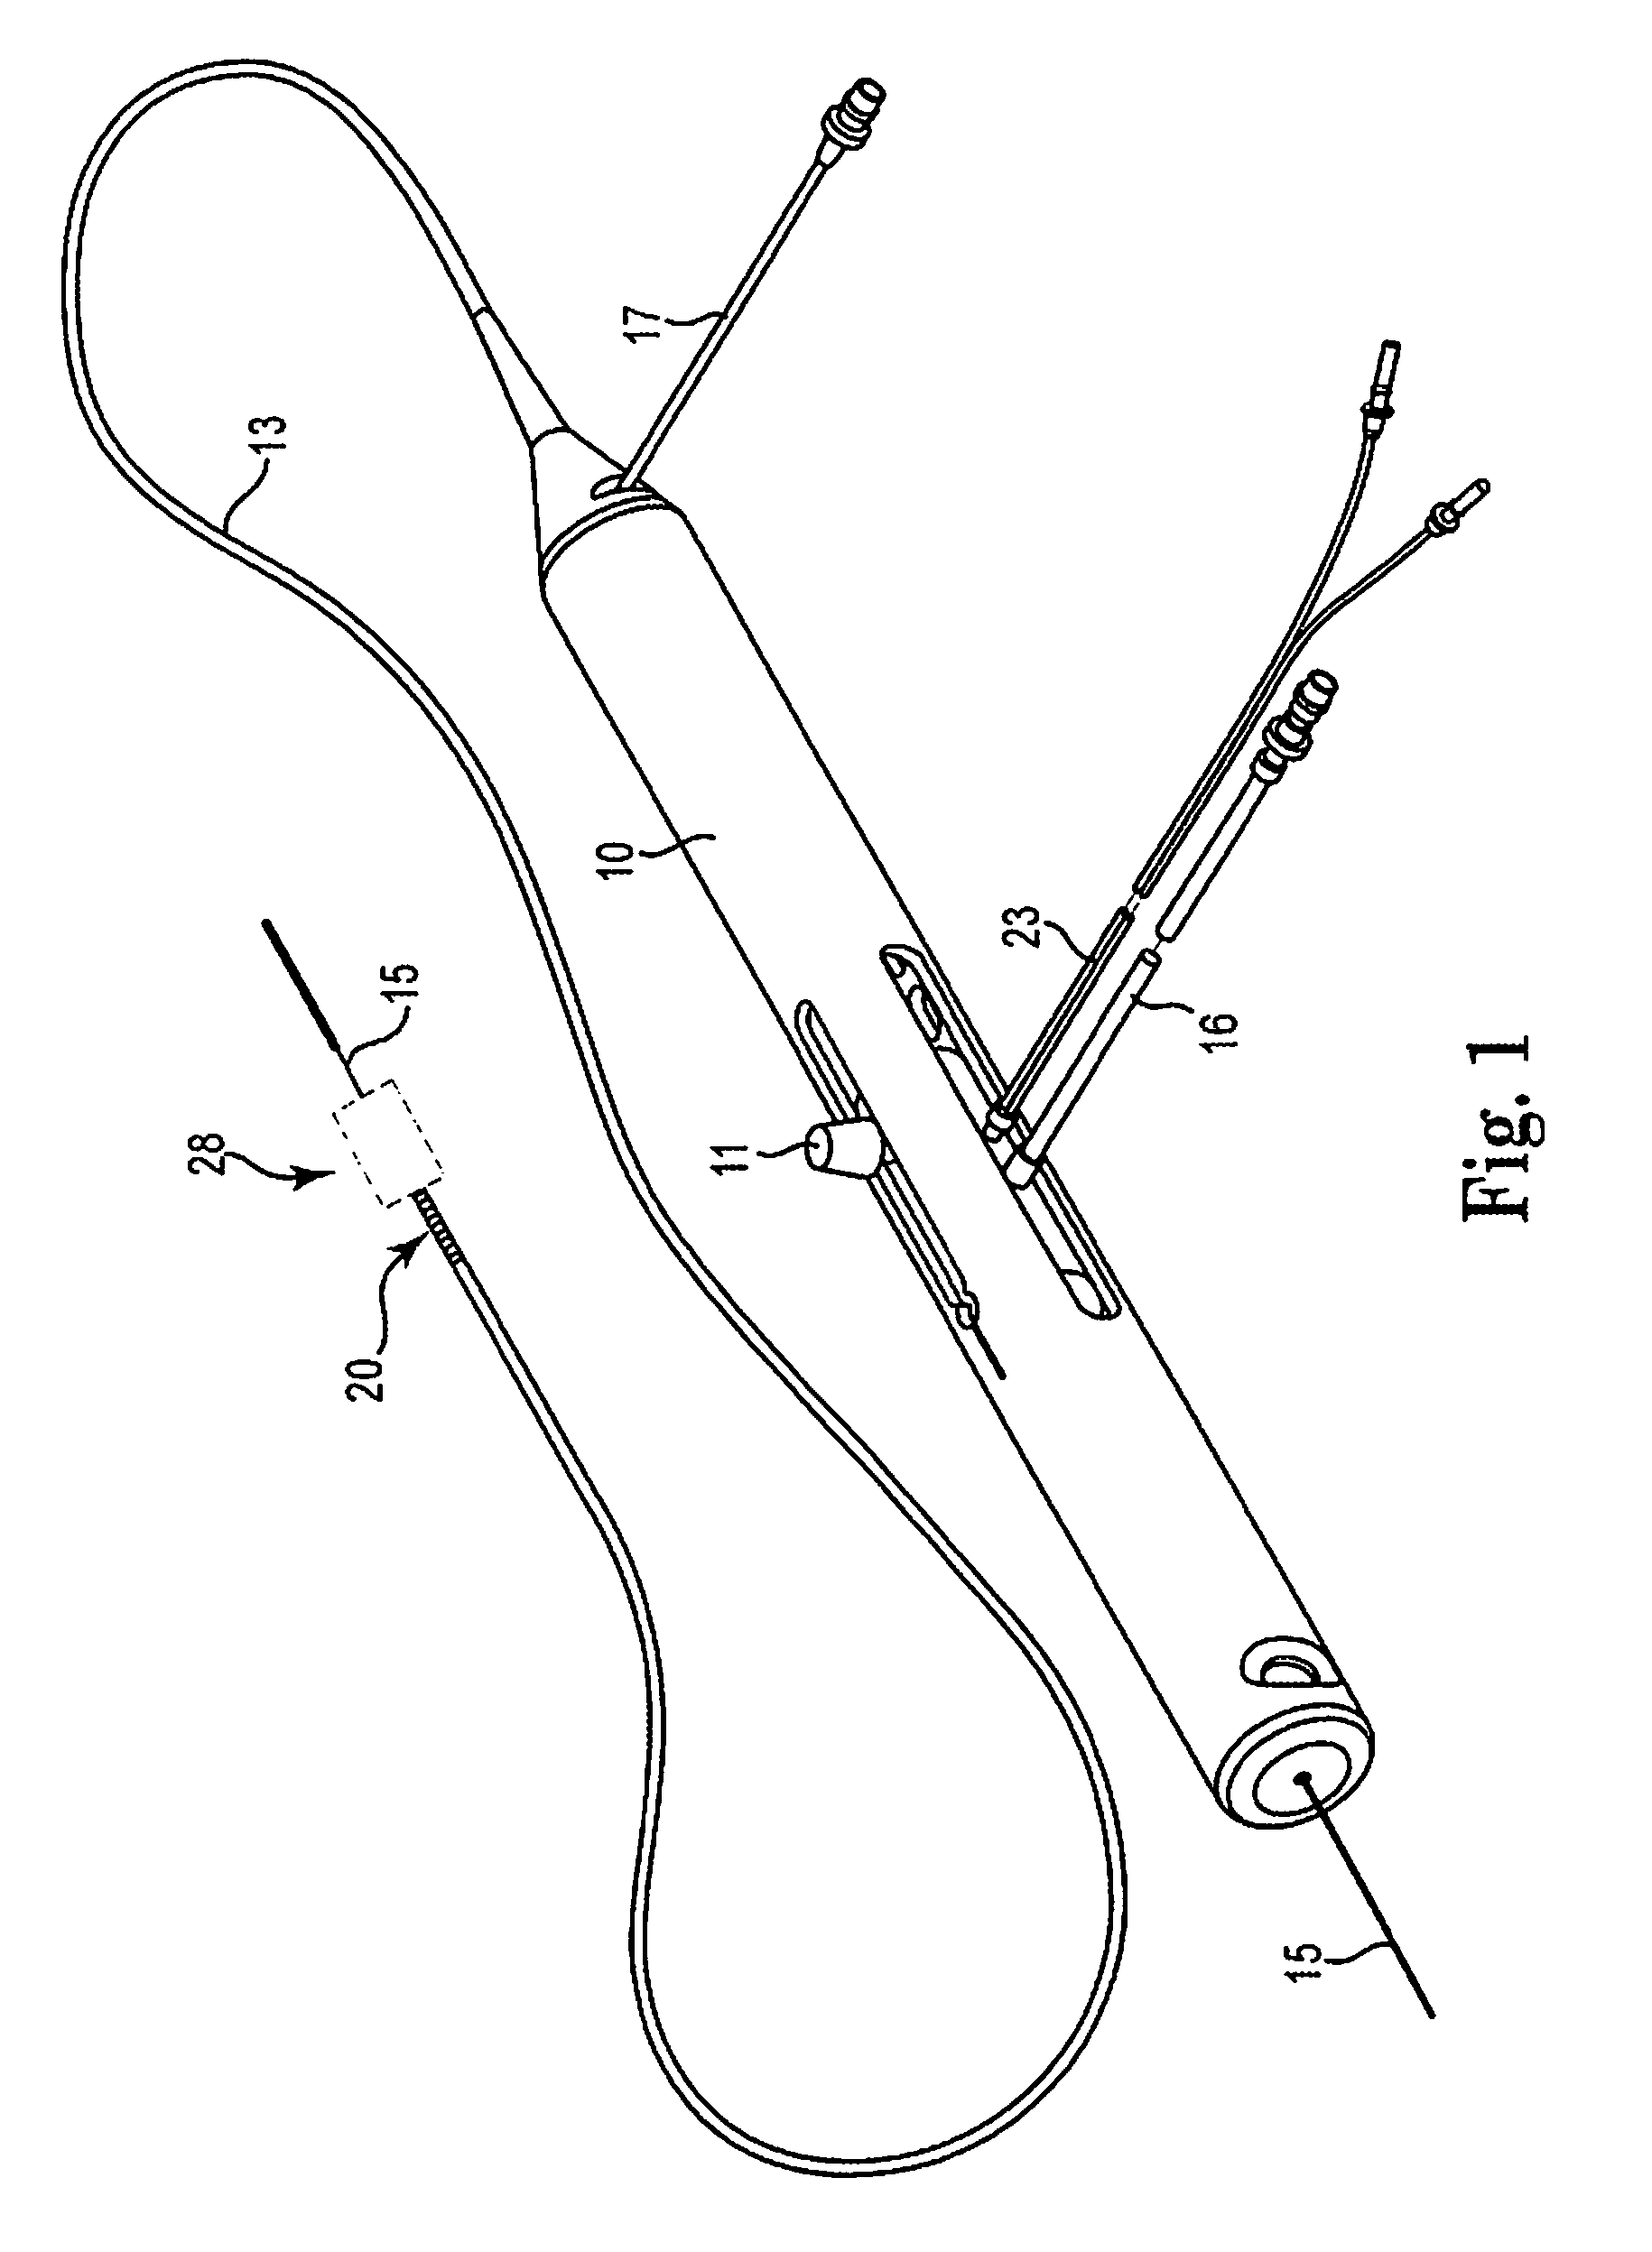 Atherectomy device, system and method having a bi-directional distal expandable ablation element